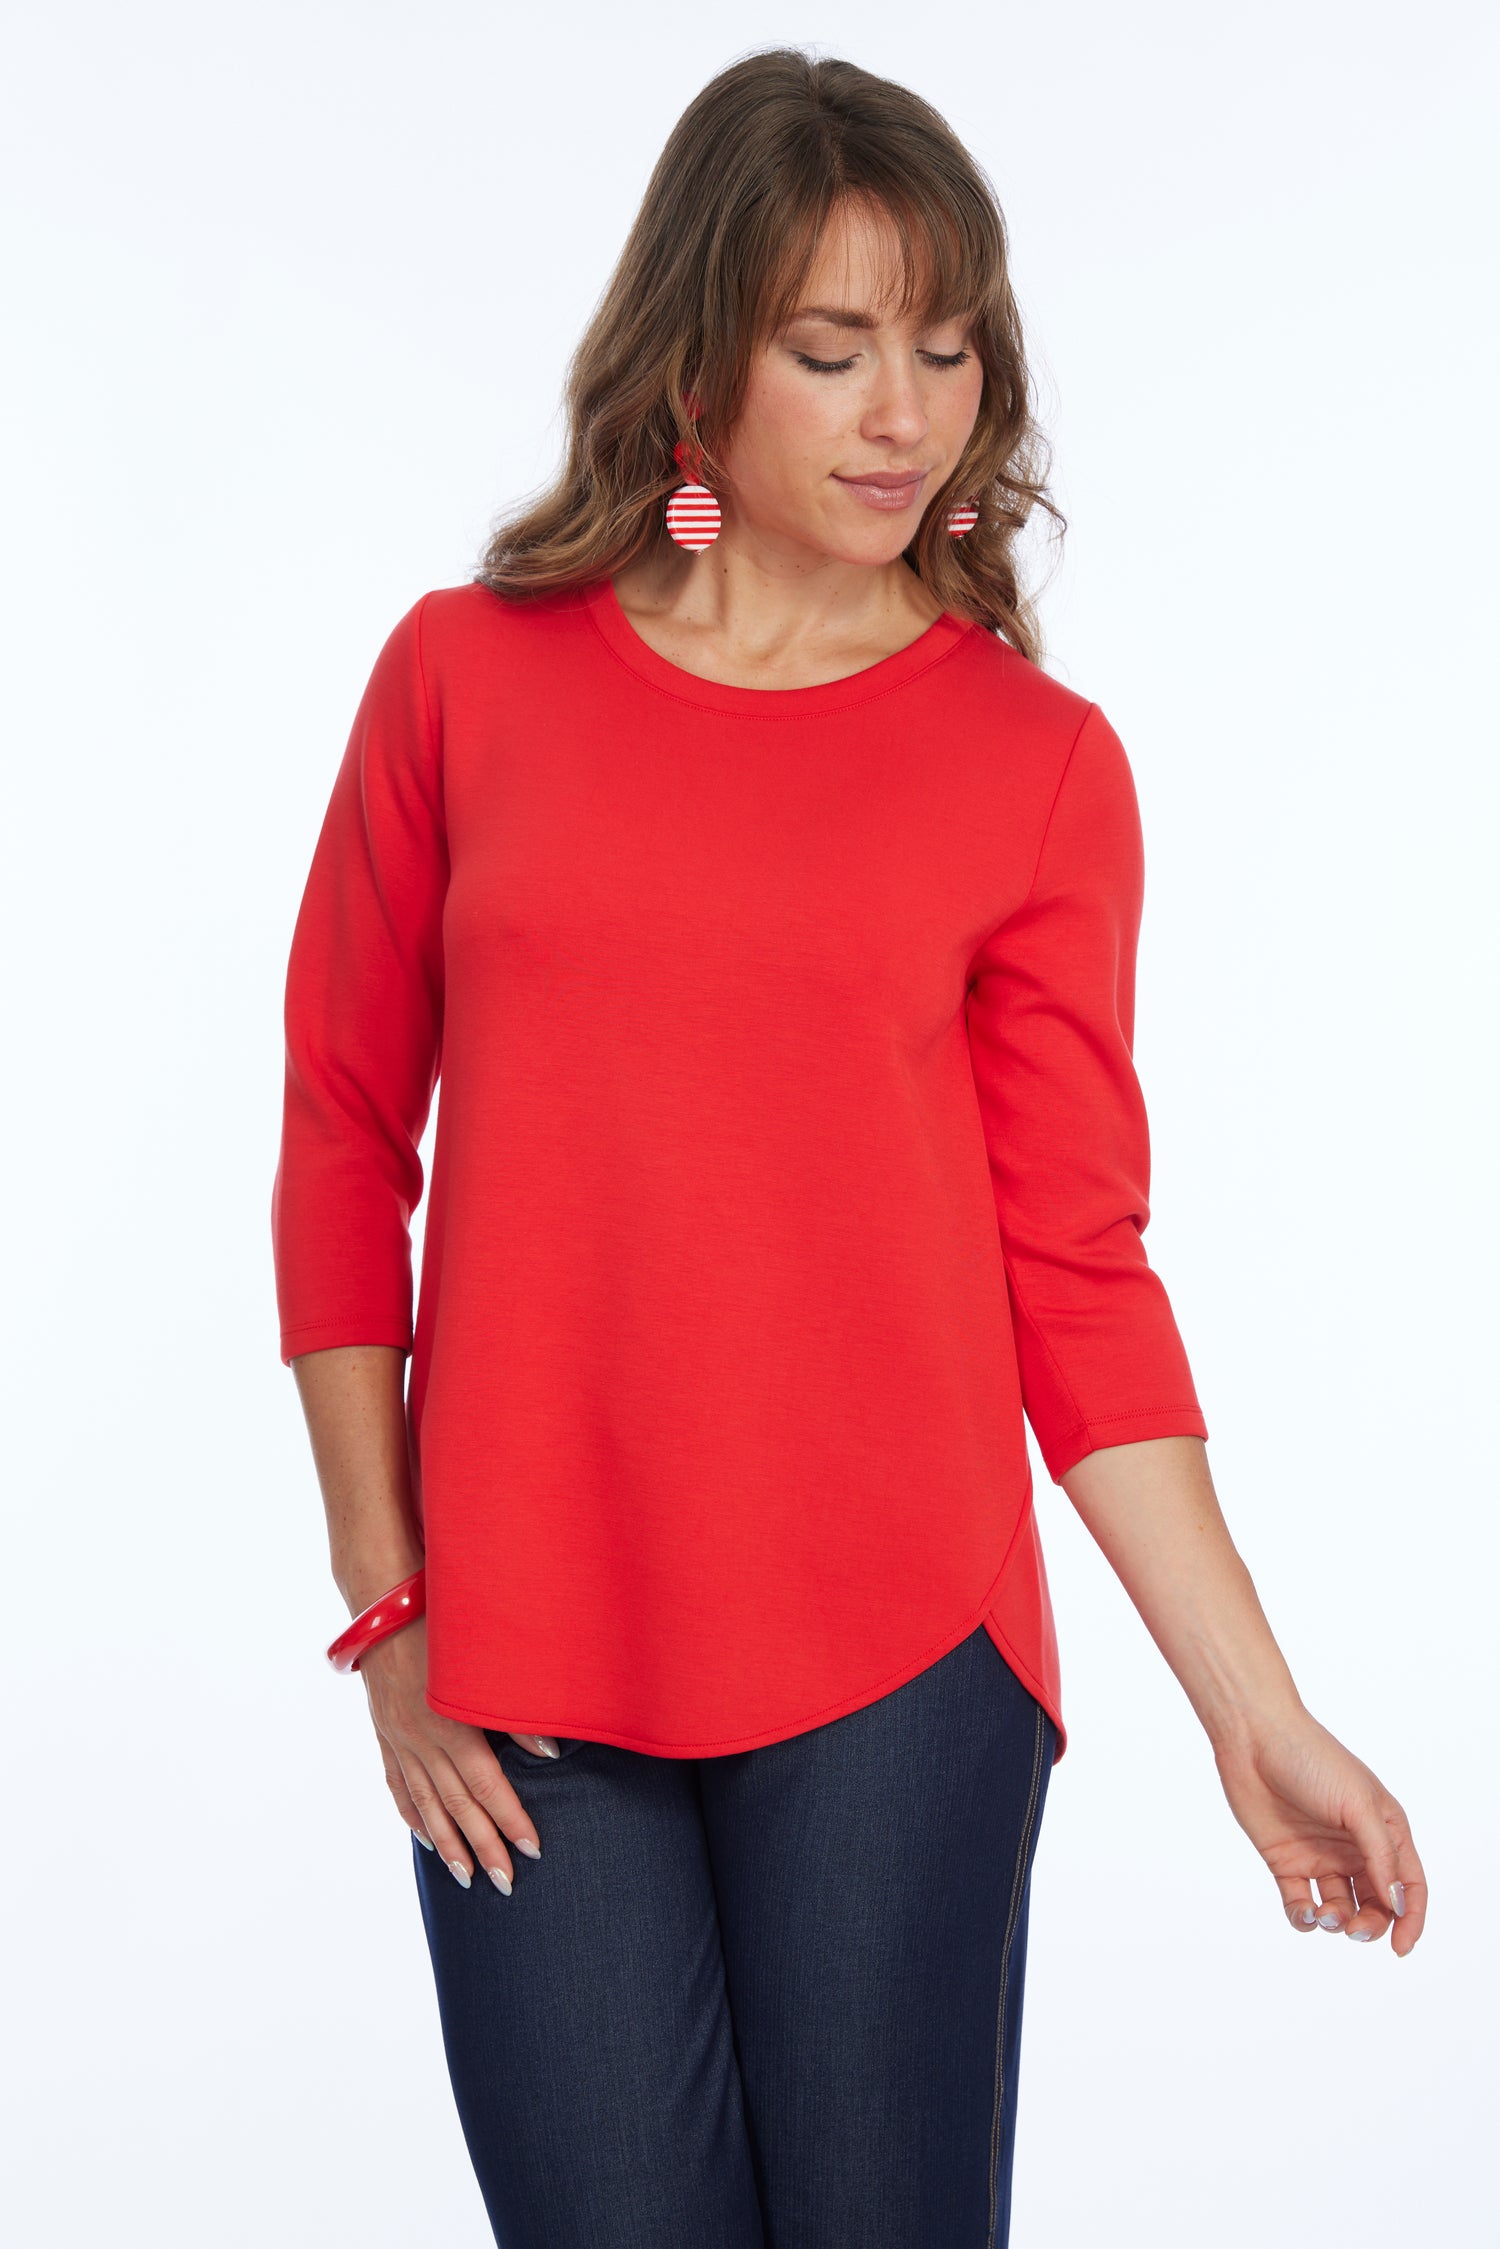 ponte knit tops for women